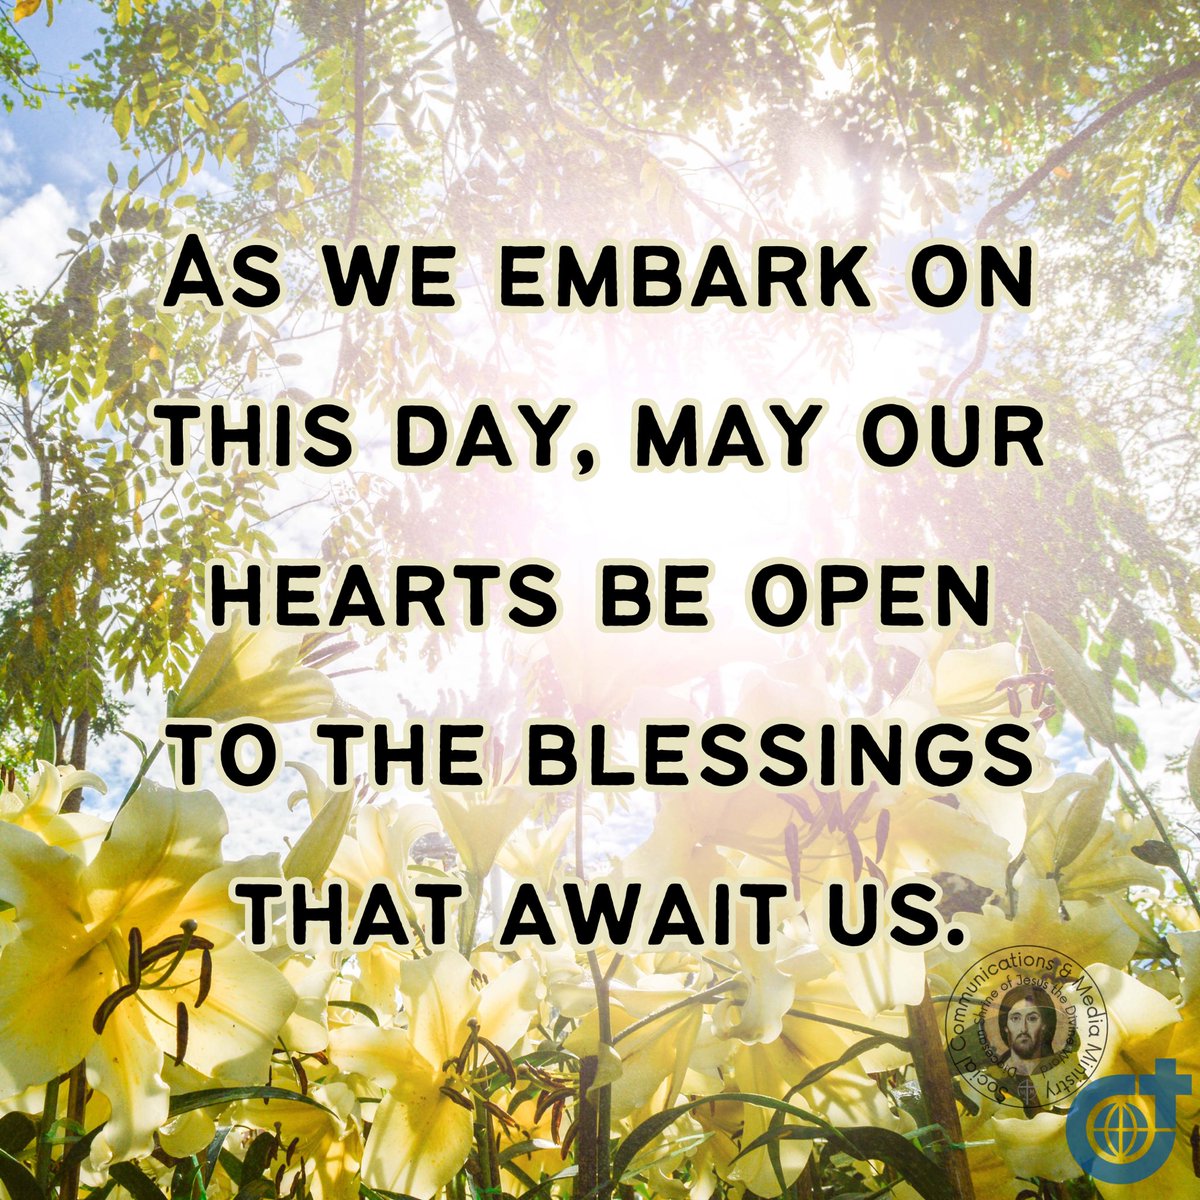 Friends, as we embark on this day, may our hearts be open to the blessings that await us.

#MorningReflections #EmbracingTheLight #InnerPeace #RenewalOfSpirit #HopefulHearts #SpreadLove #NurturingSouls #GratefulForToday

***

#SVD #DSJDW #DivineWord
#WitnessToTheWord #SVDmission